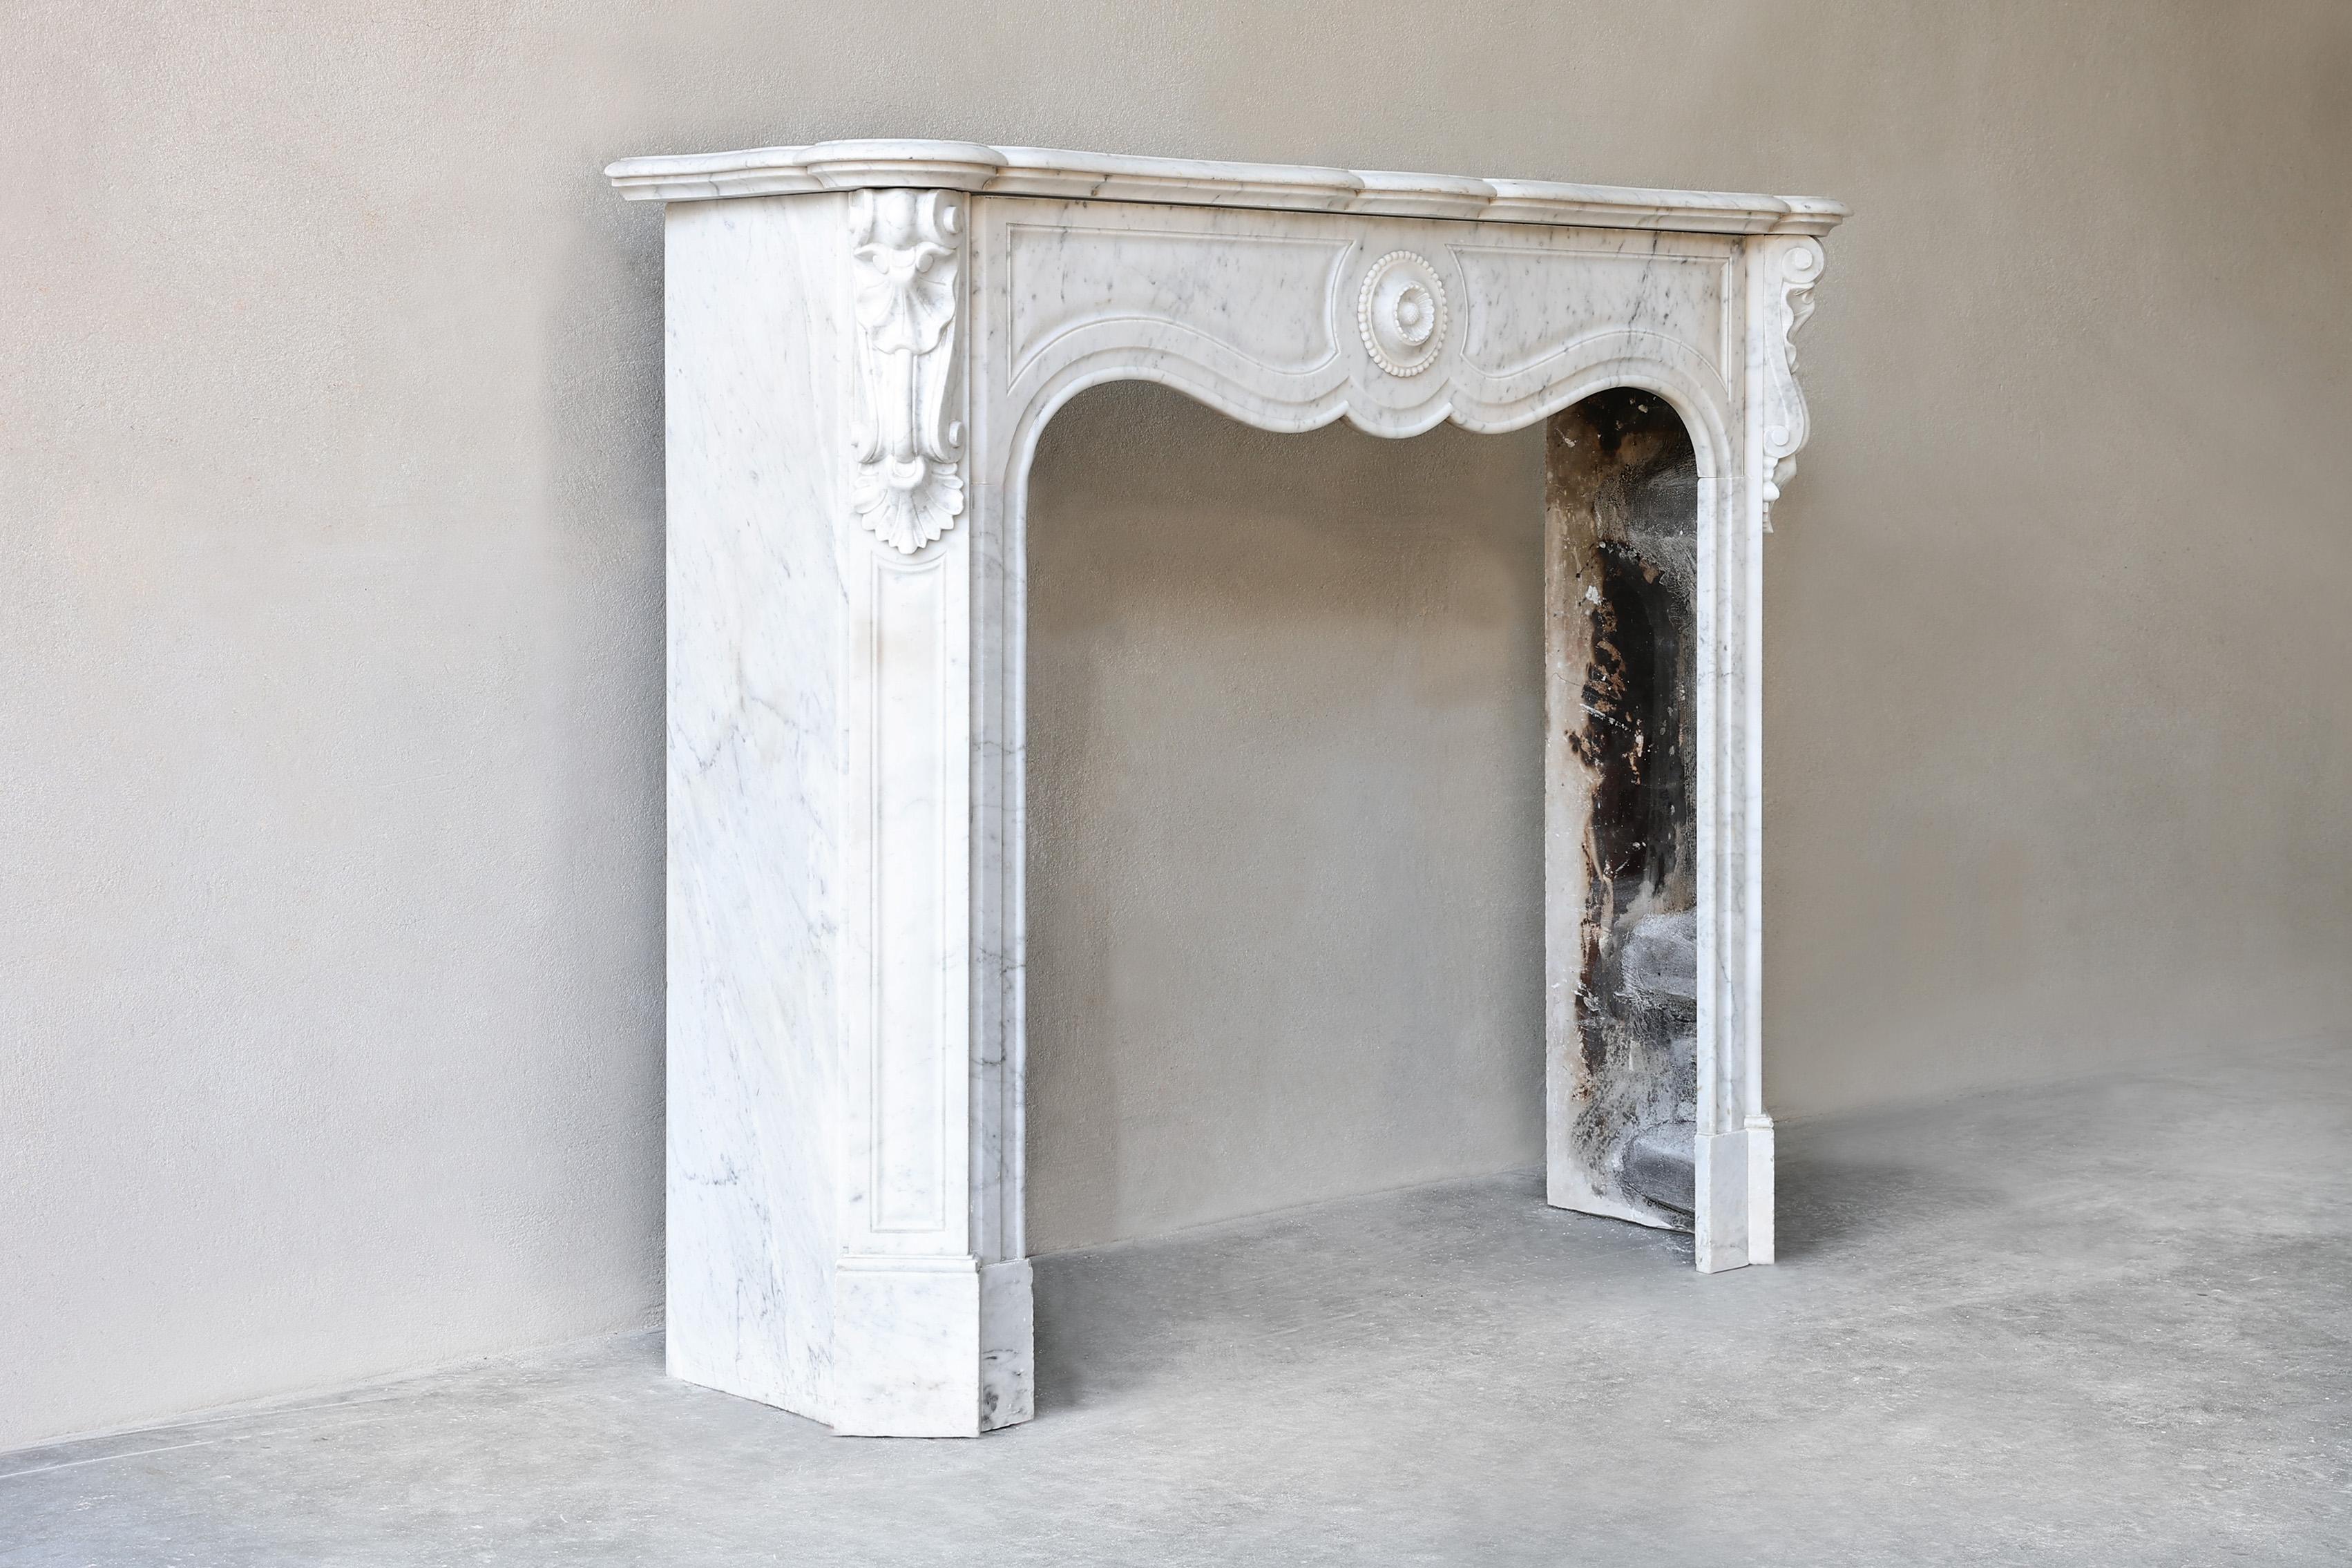 Beautiful antique fireplace from the 19th century in Pompadour style. A compact mantle due to its size with an elegant look and the various ornaments and decorations! This Carrara marble mantel is chic and adds value to your interior!